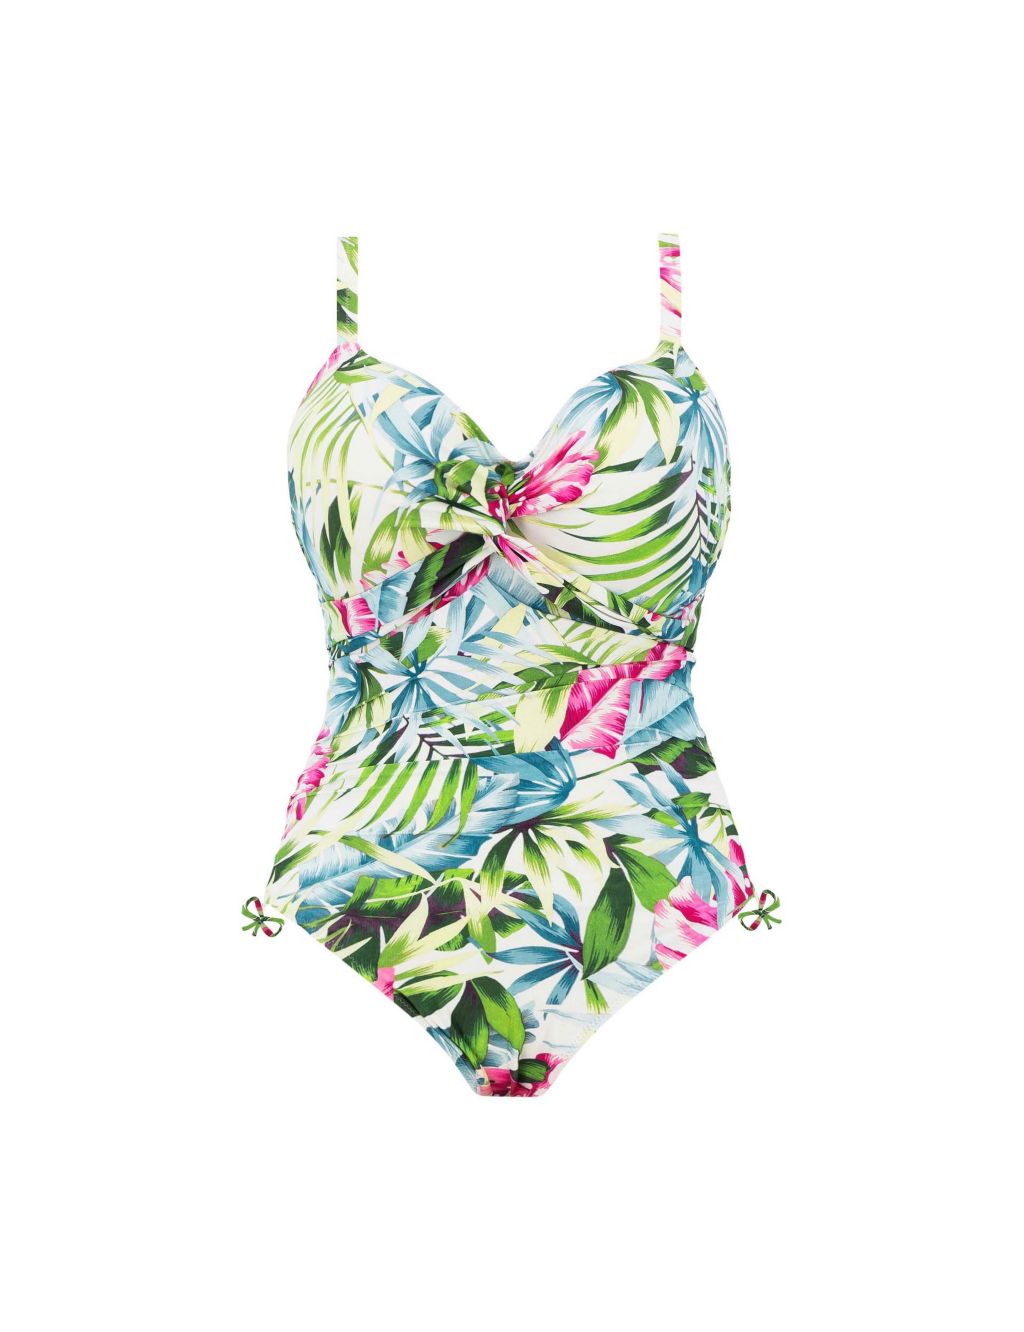 Langkawi Floral Wired Twist Front Swimsuit image 2